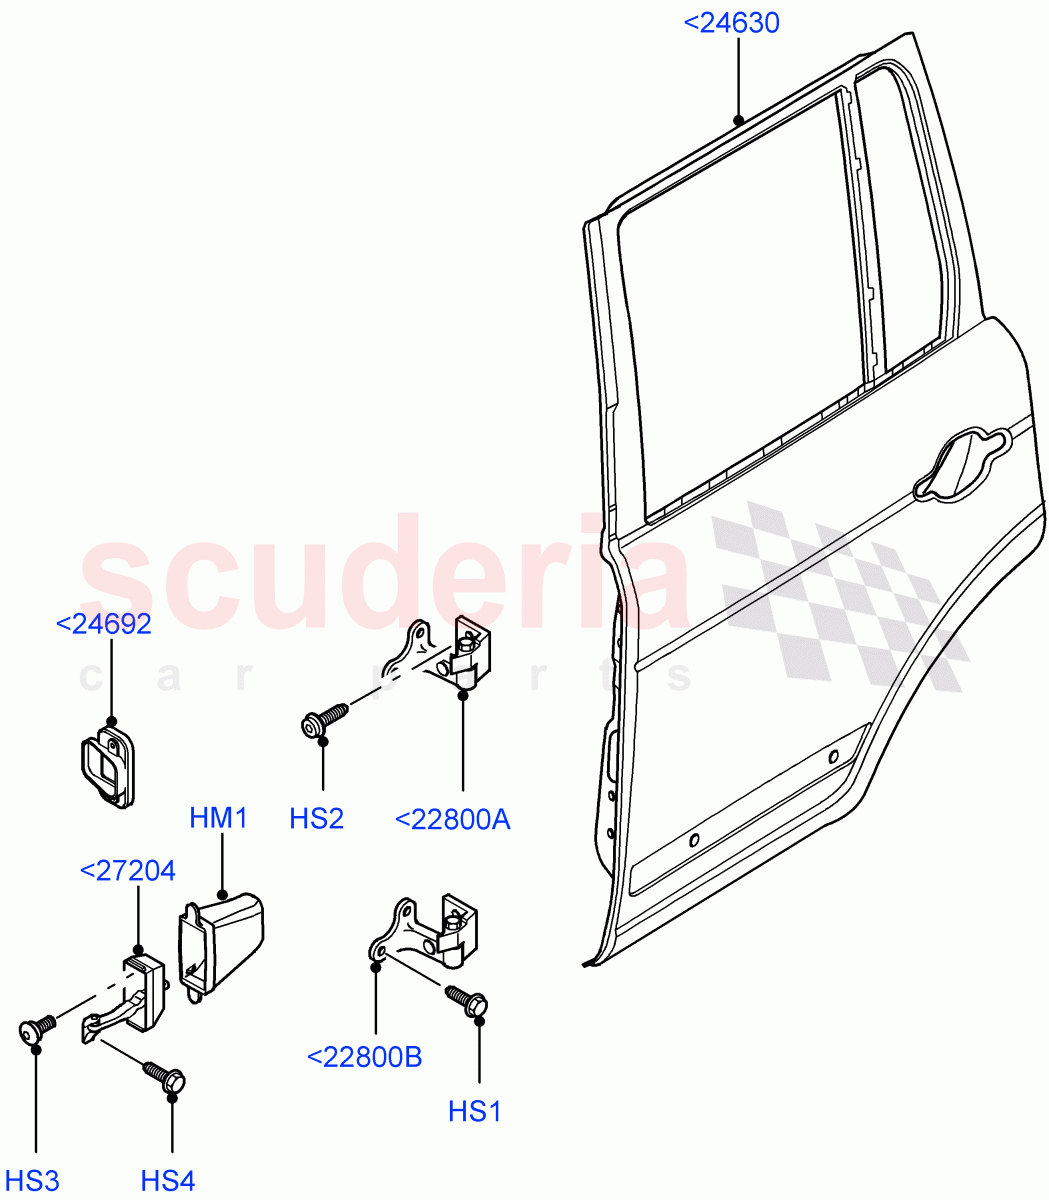 Rear Doors, Hinges & Weatherstrips(Door And Fixings)((V)FROMAA000001) of Land Rover Land Rover Range Rover (2010-2012) [5.0 OHC SGDI SC V8 Petrol]